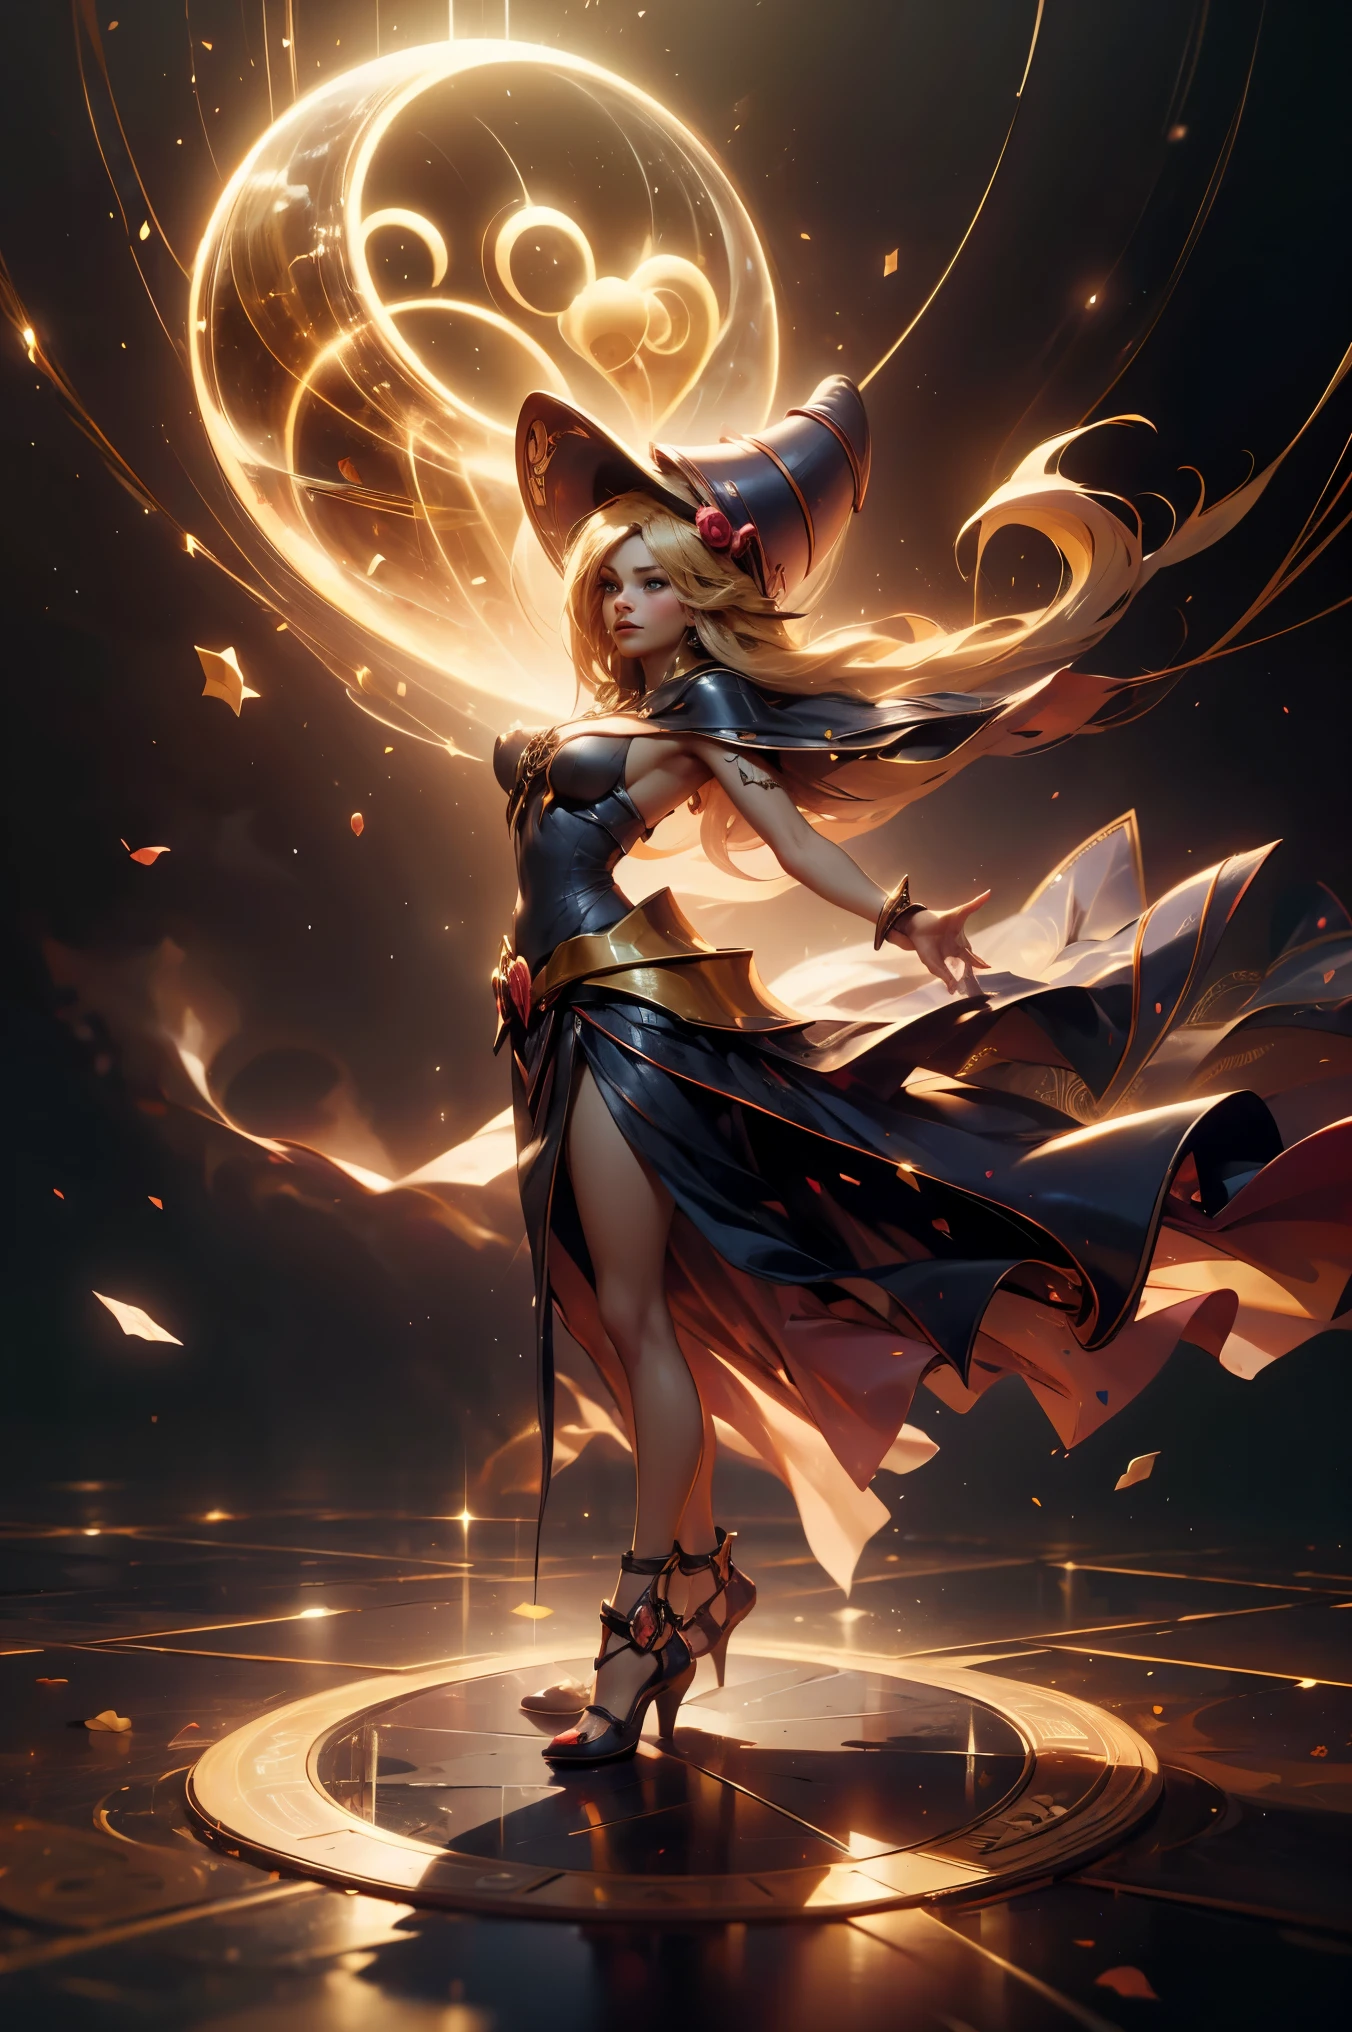 (Masterpiece:1.2), (The best quality:1.2), Perfect lighting, Dark Magician Girl casting a spell, in battle. floating in the air, visible medium tits, transparent neckline, blue robe, big hat, From above, sparkles, Yugioh game, The magic of the heart. LIGHTS OF THE HEART, Romantic heart. She wears heels. has heels. Wear heels 